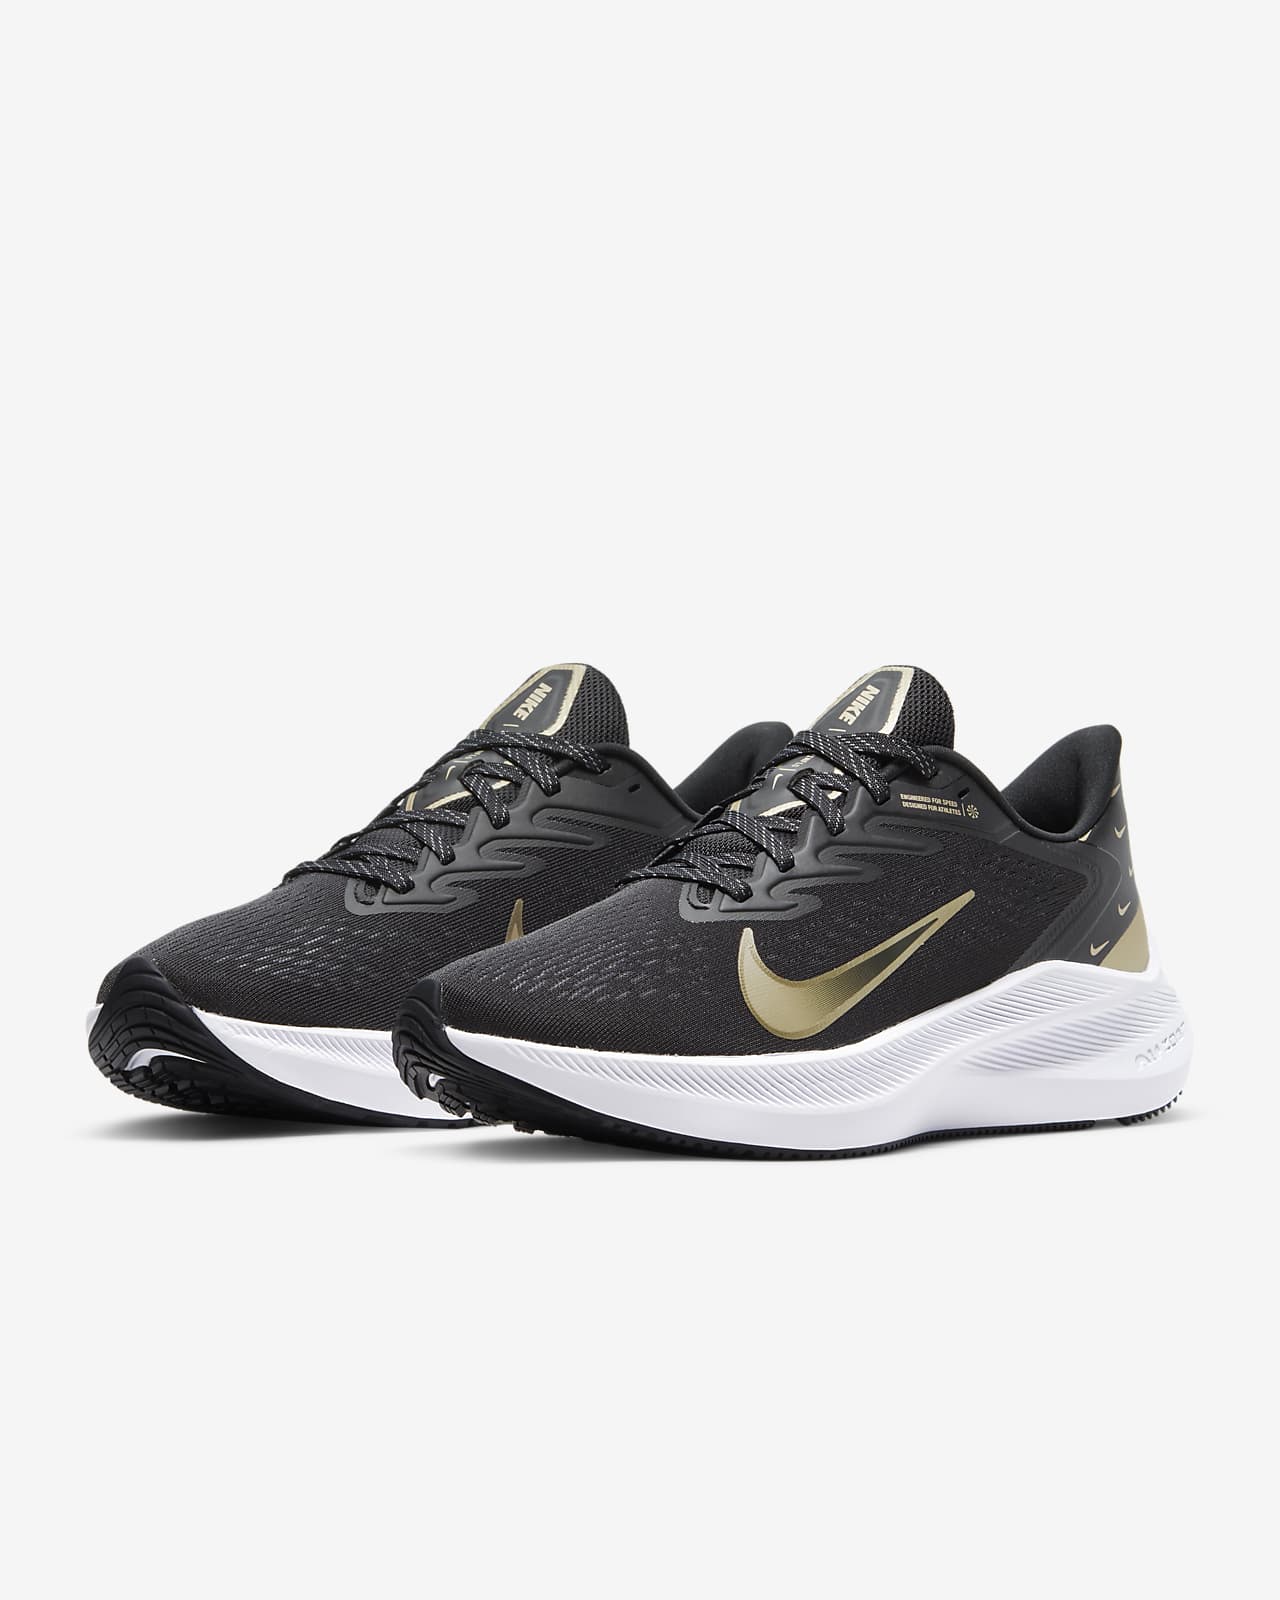 nike womens running shoes black and gold